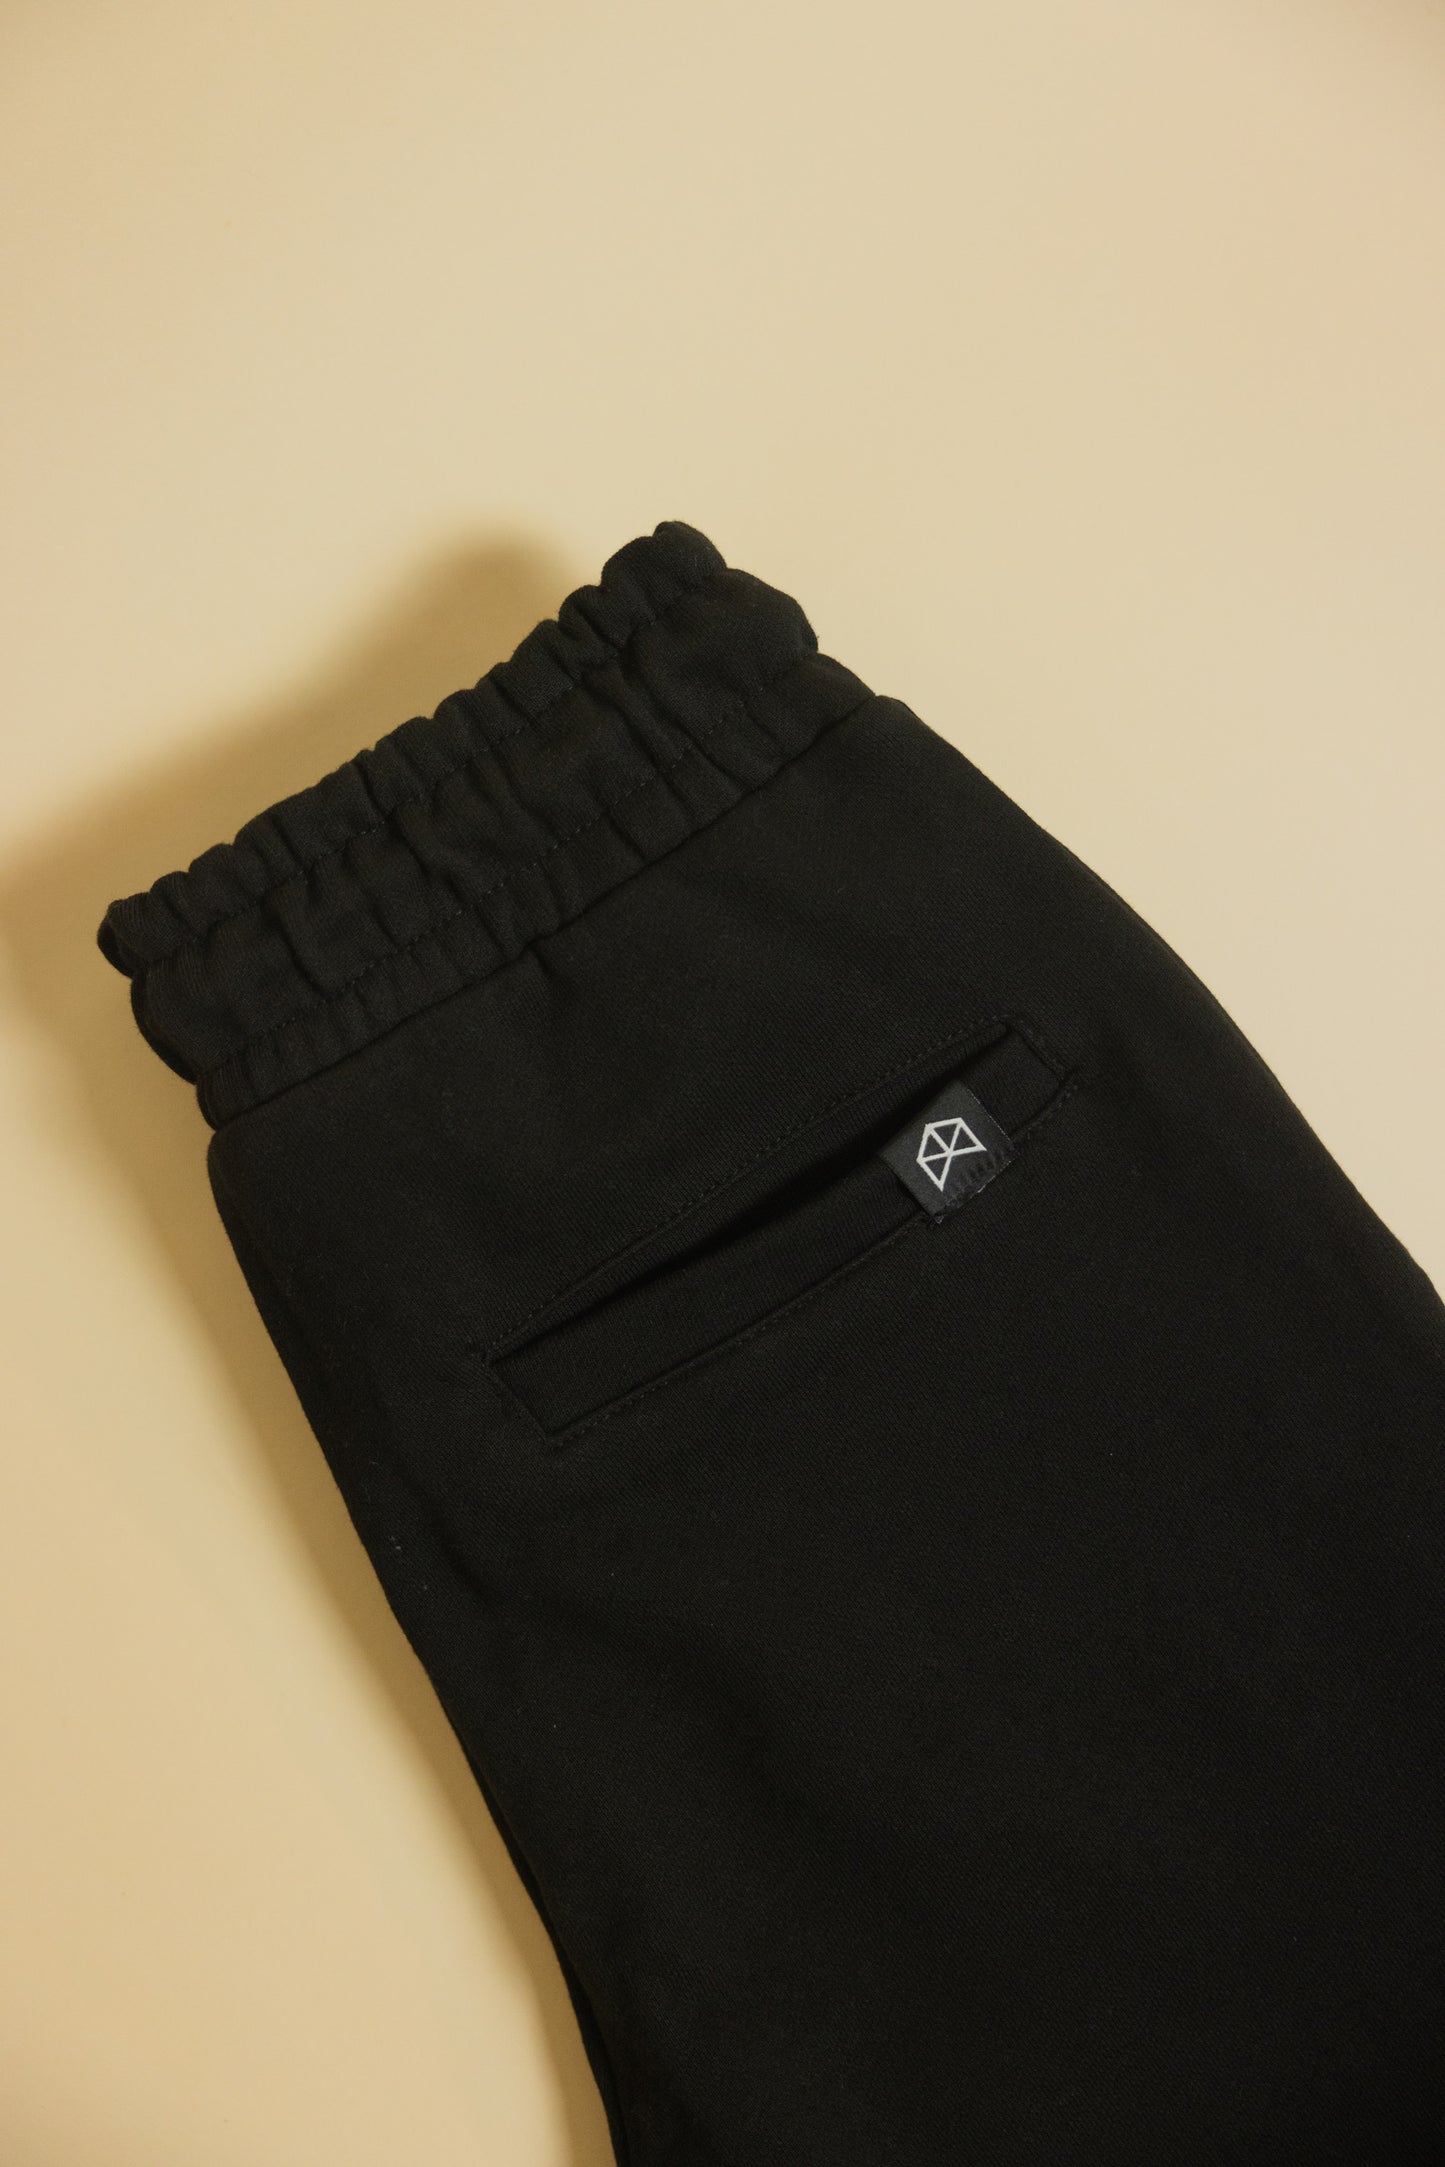 Rawgear Front Embroidery Jogger